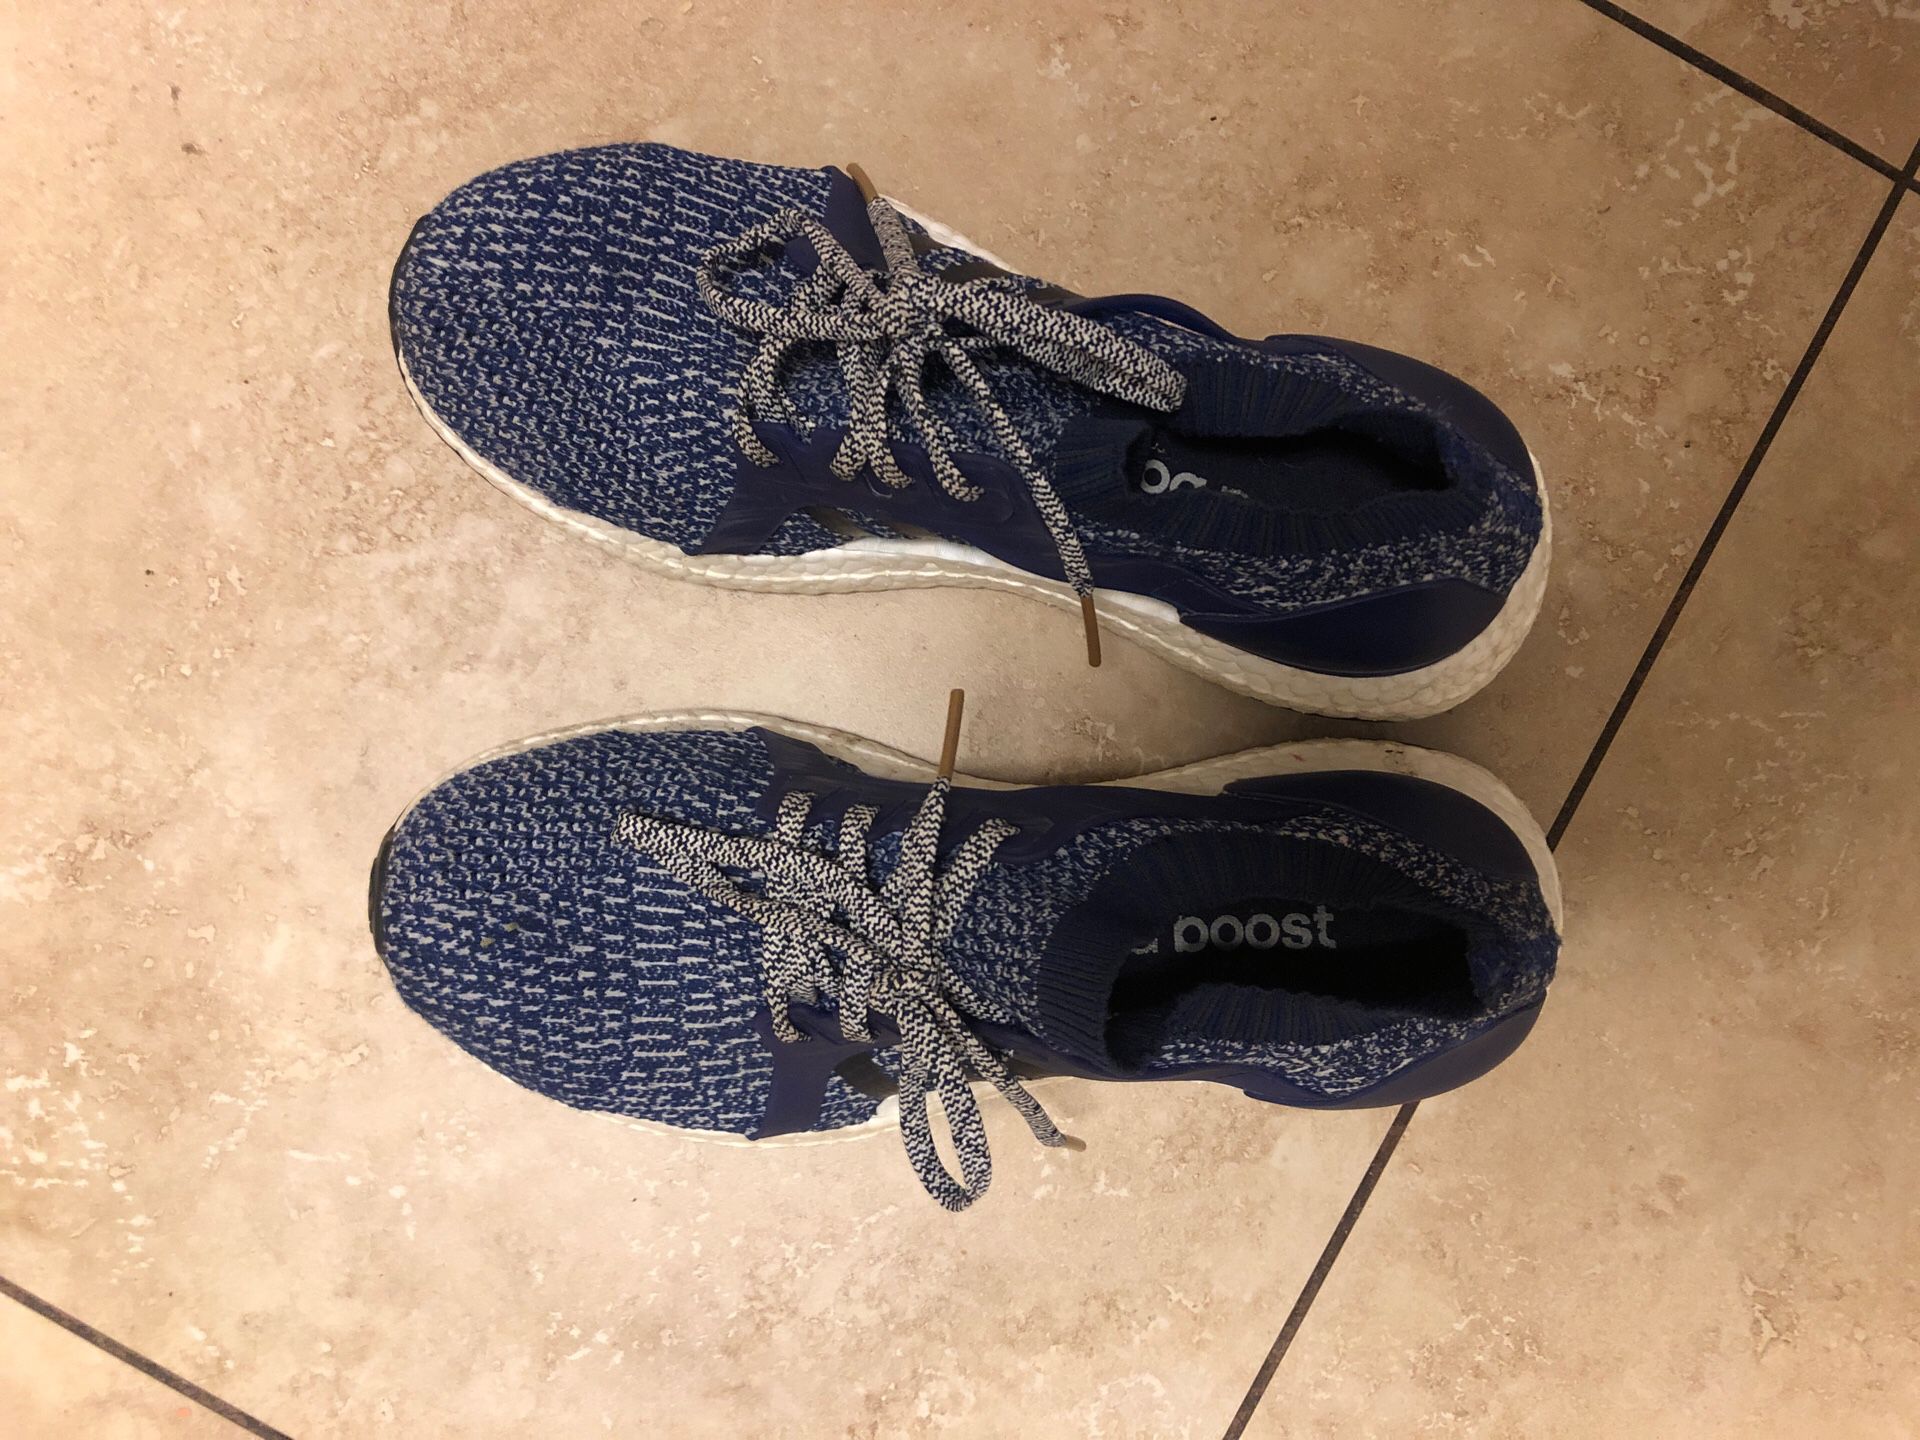 Adidas Ultraboost Running Shoes Size 9.5 (used)